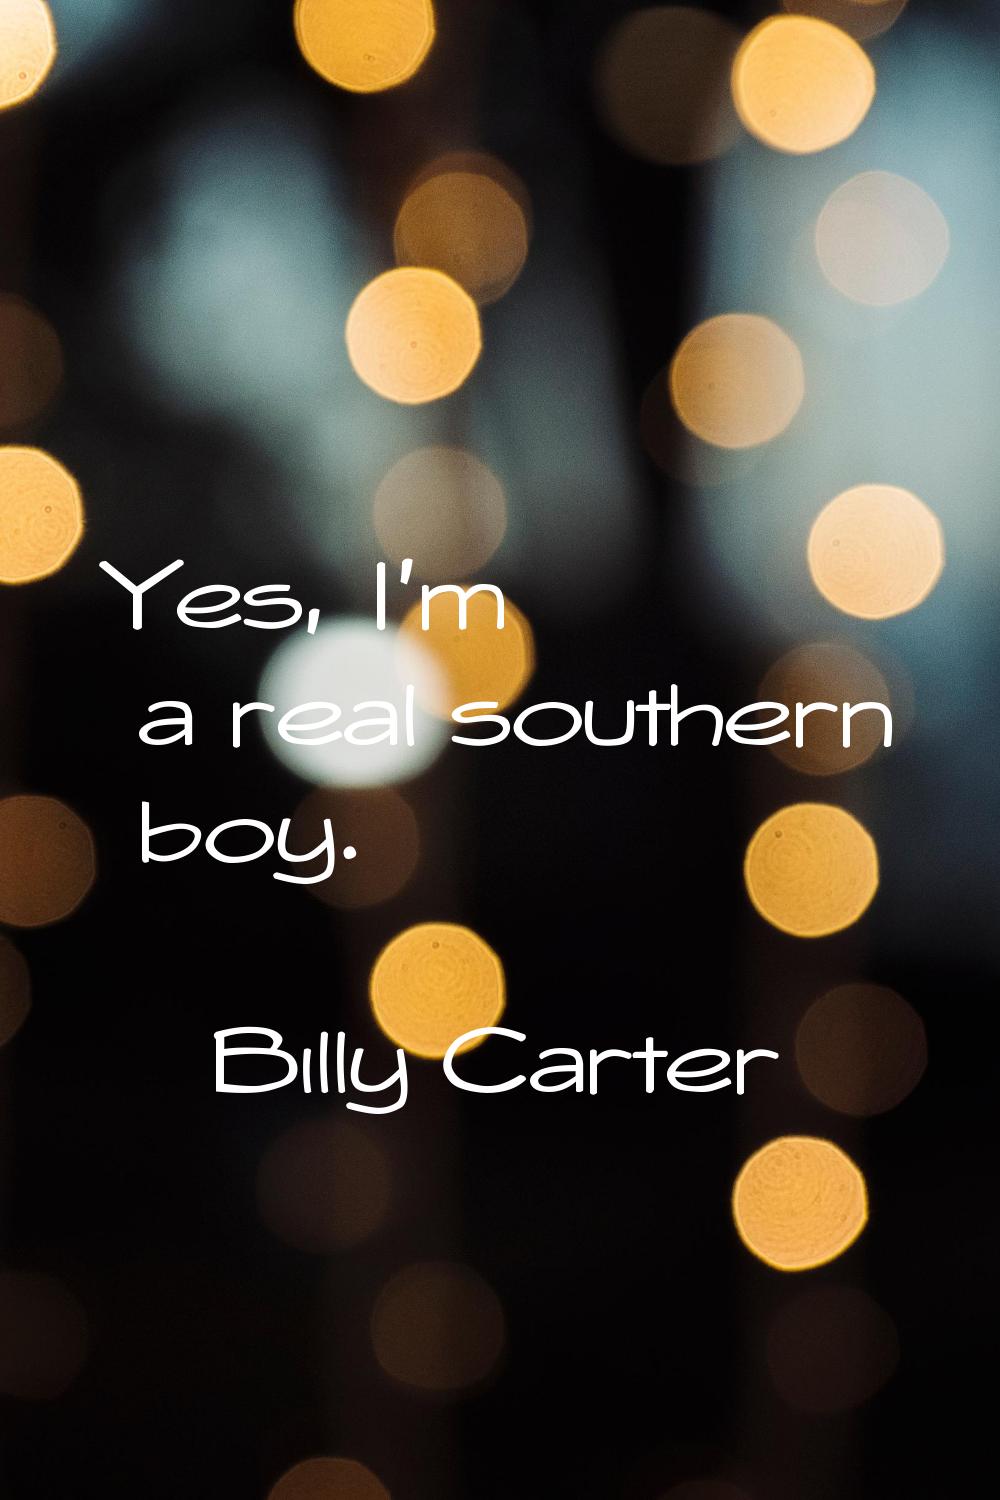 Yes, I'm a real southern boy.